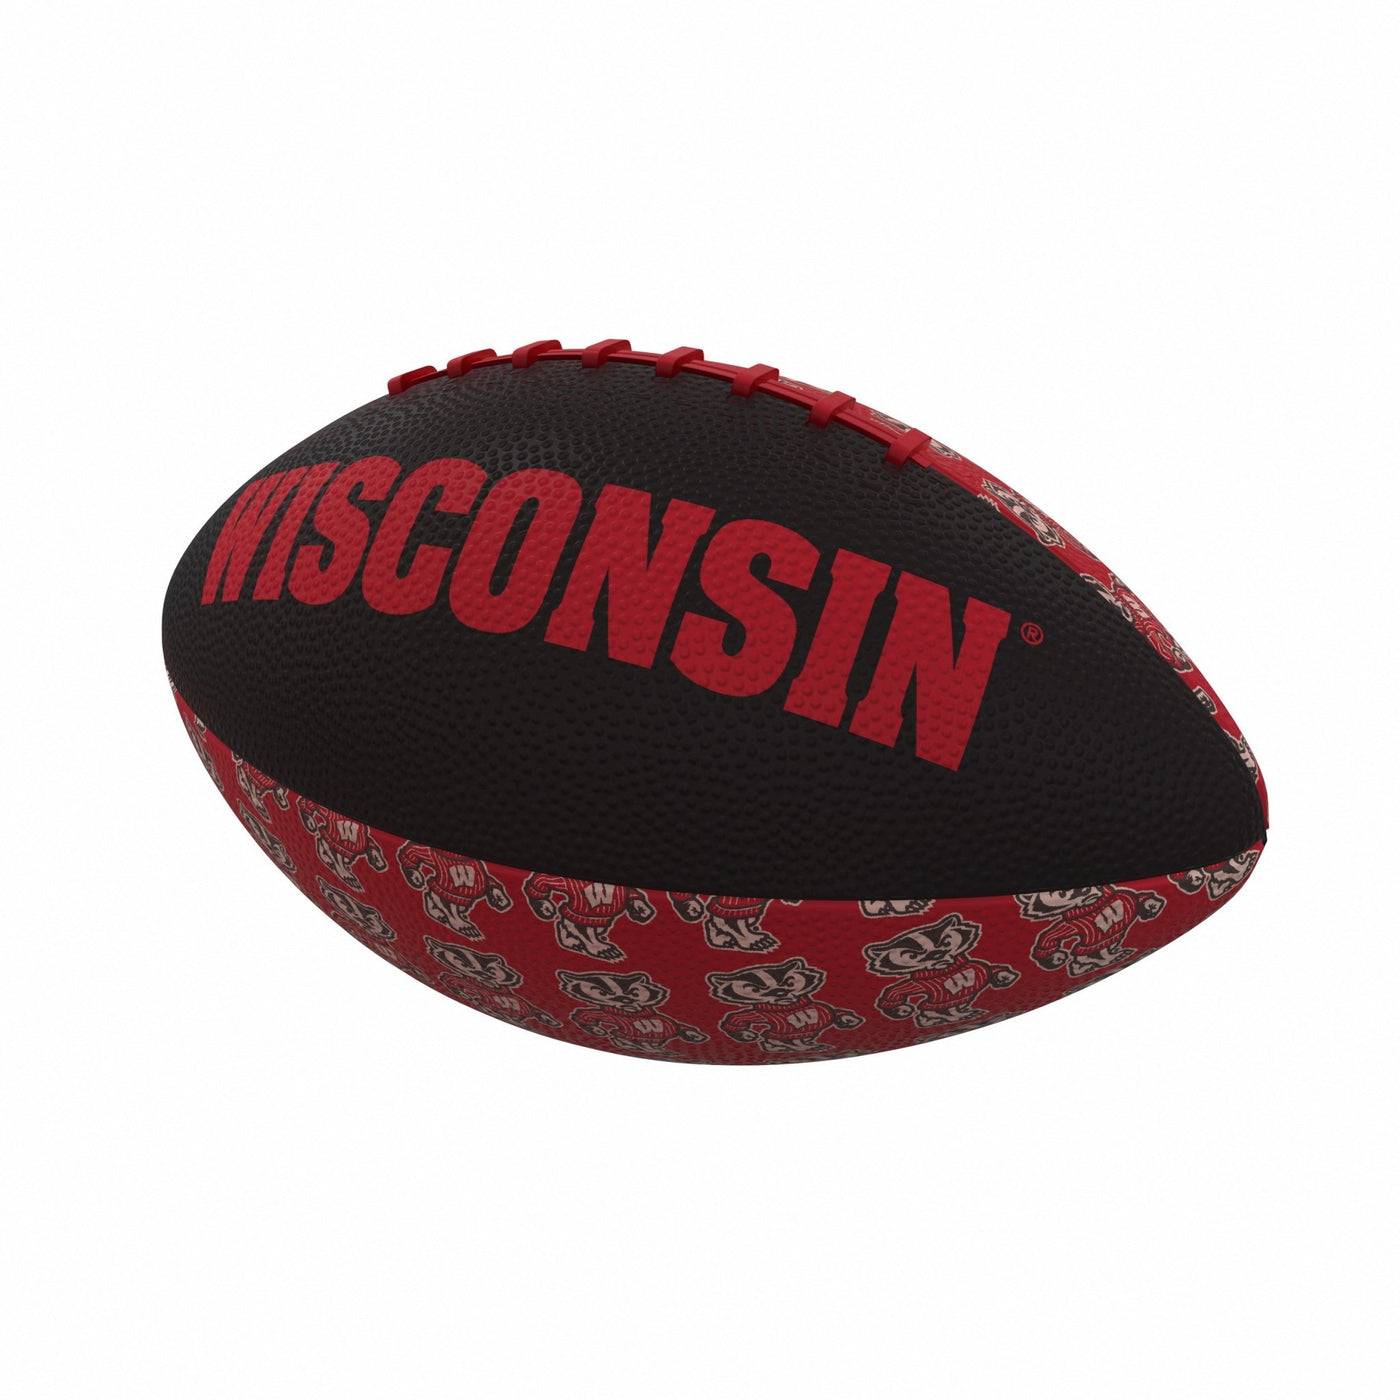 Wisconsin Repeating Mini-Size Rubber Football - Logo Brands